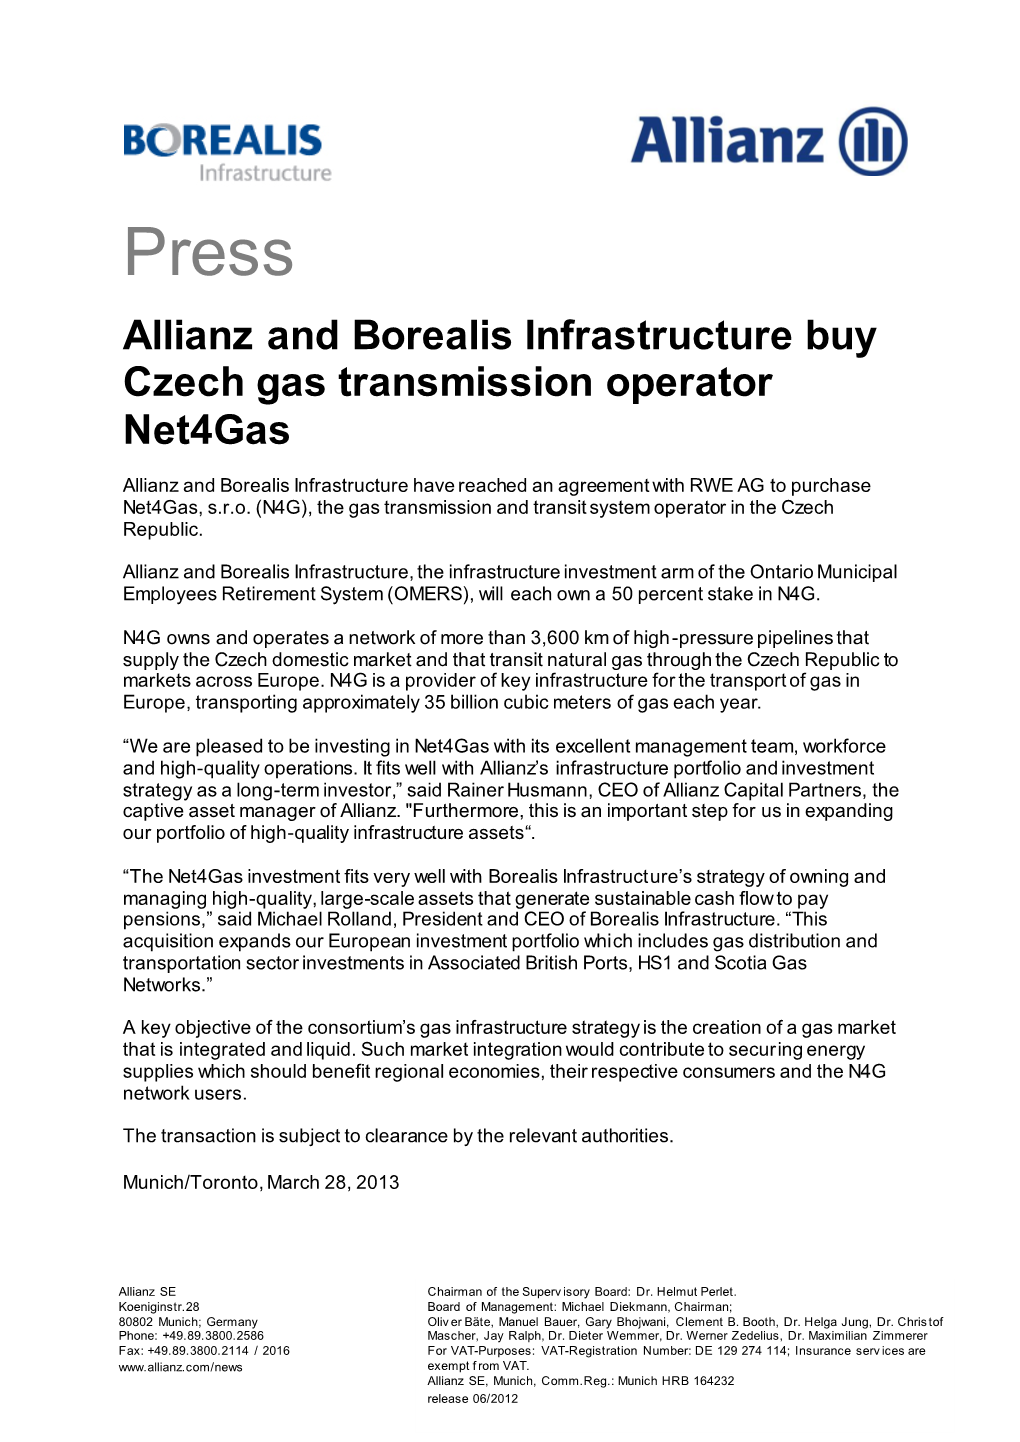 Press Release: "Allianz and Borealis Infrastructure Buy Czech Gas Transmission Operator Net4gas"